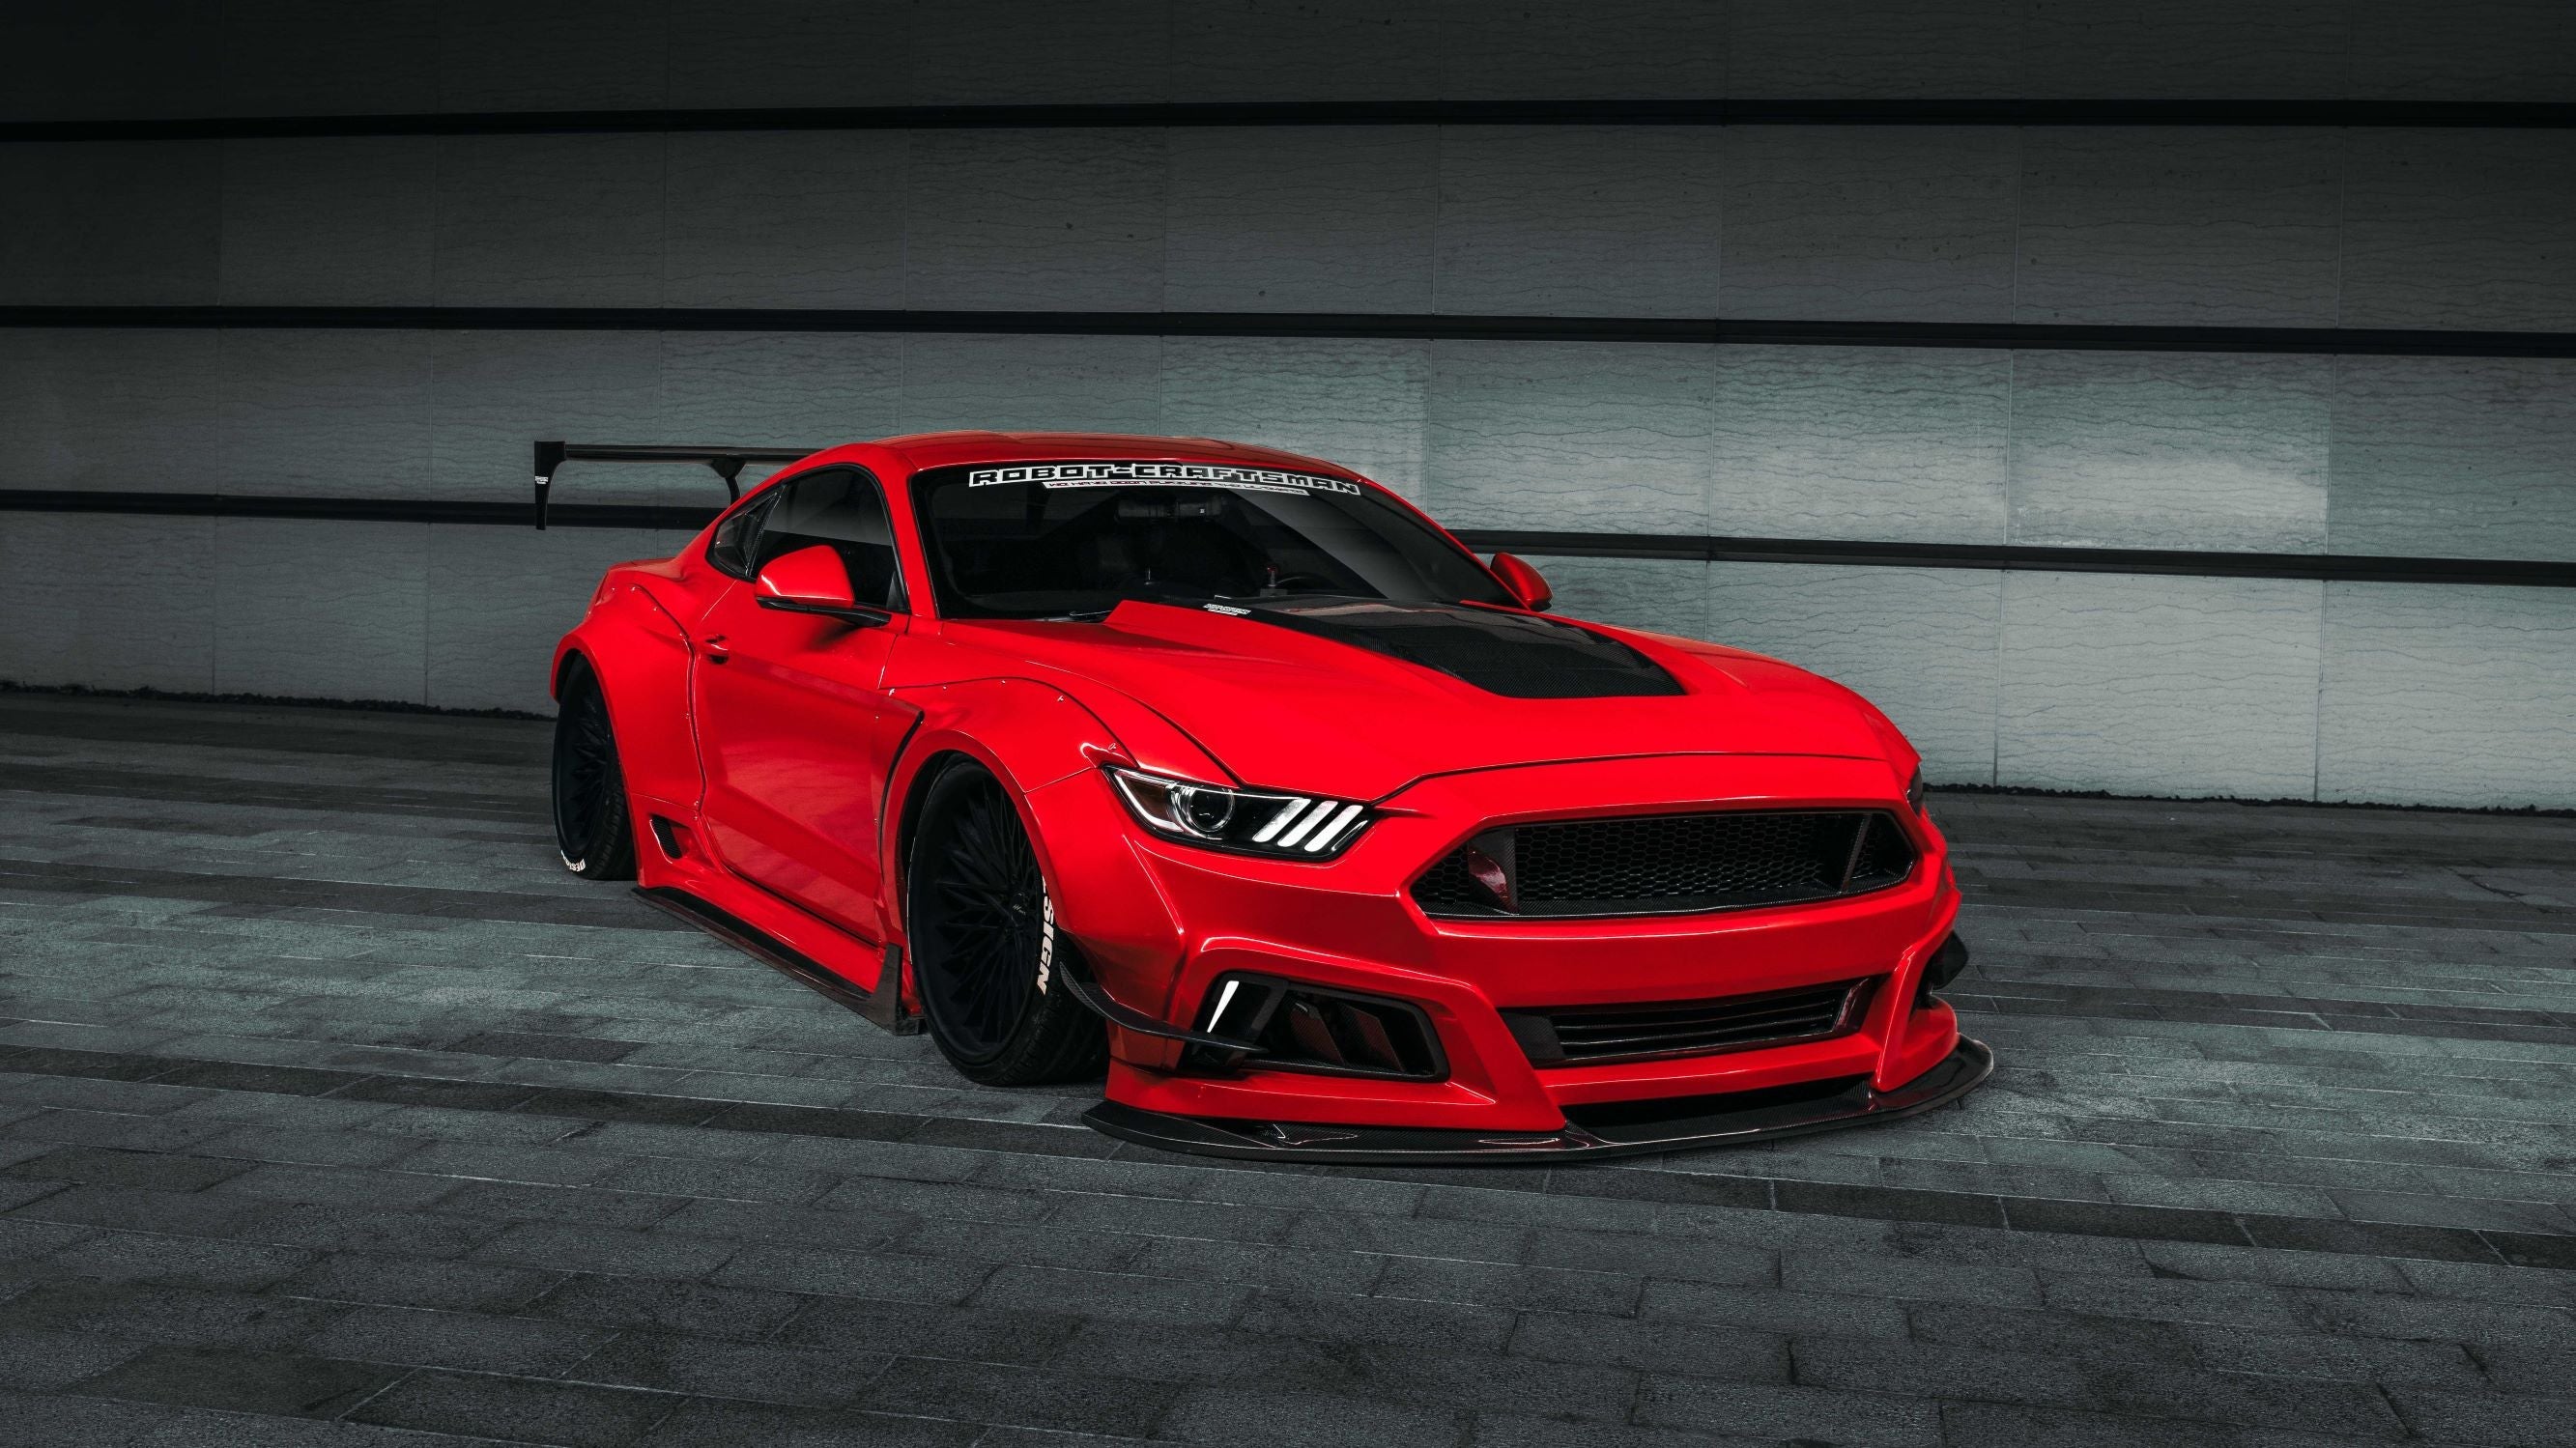 Robot  "STORM" Widebody Wheel Arches & Side Skirts For Ford Mustang S550.1 S550.2 GT EcoBoost V6